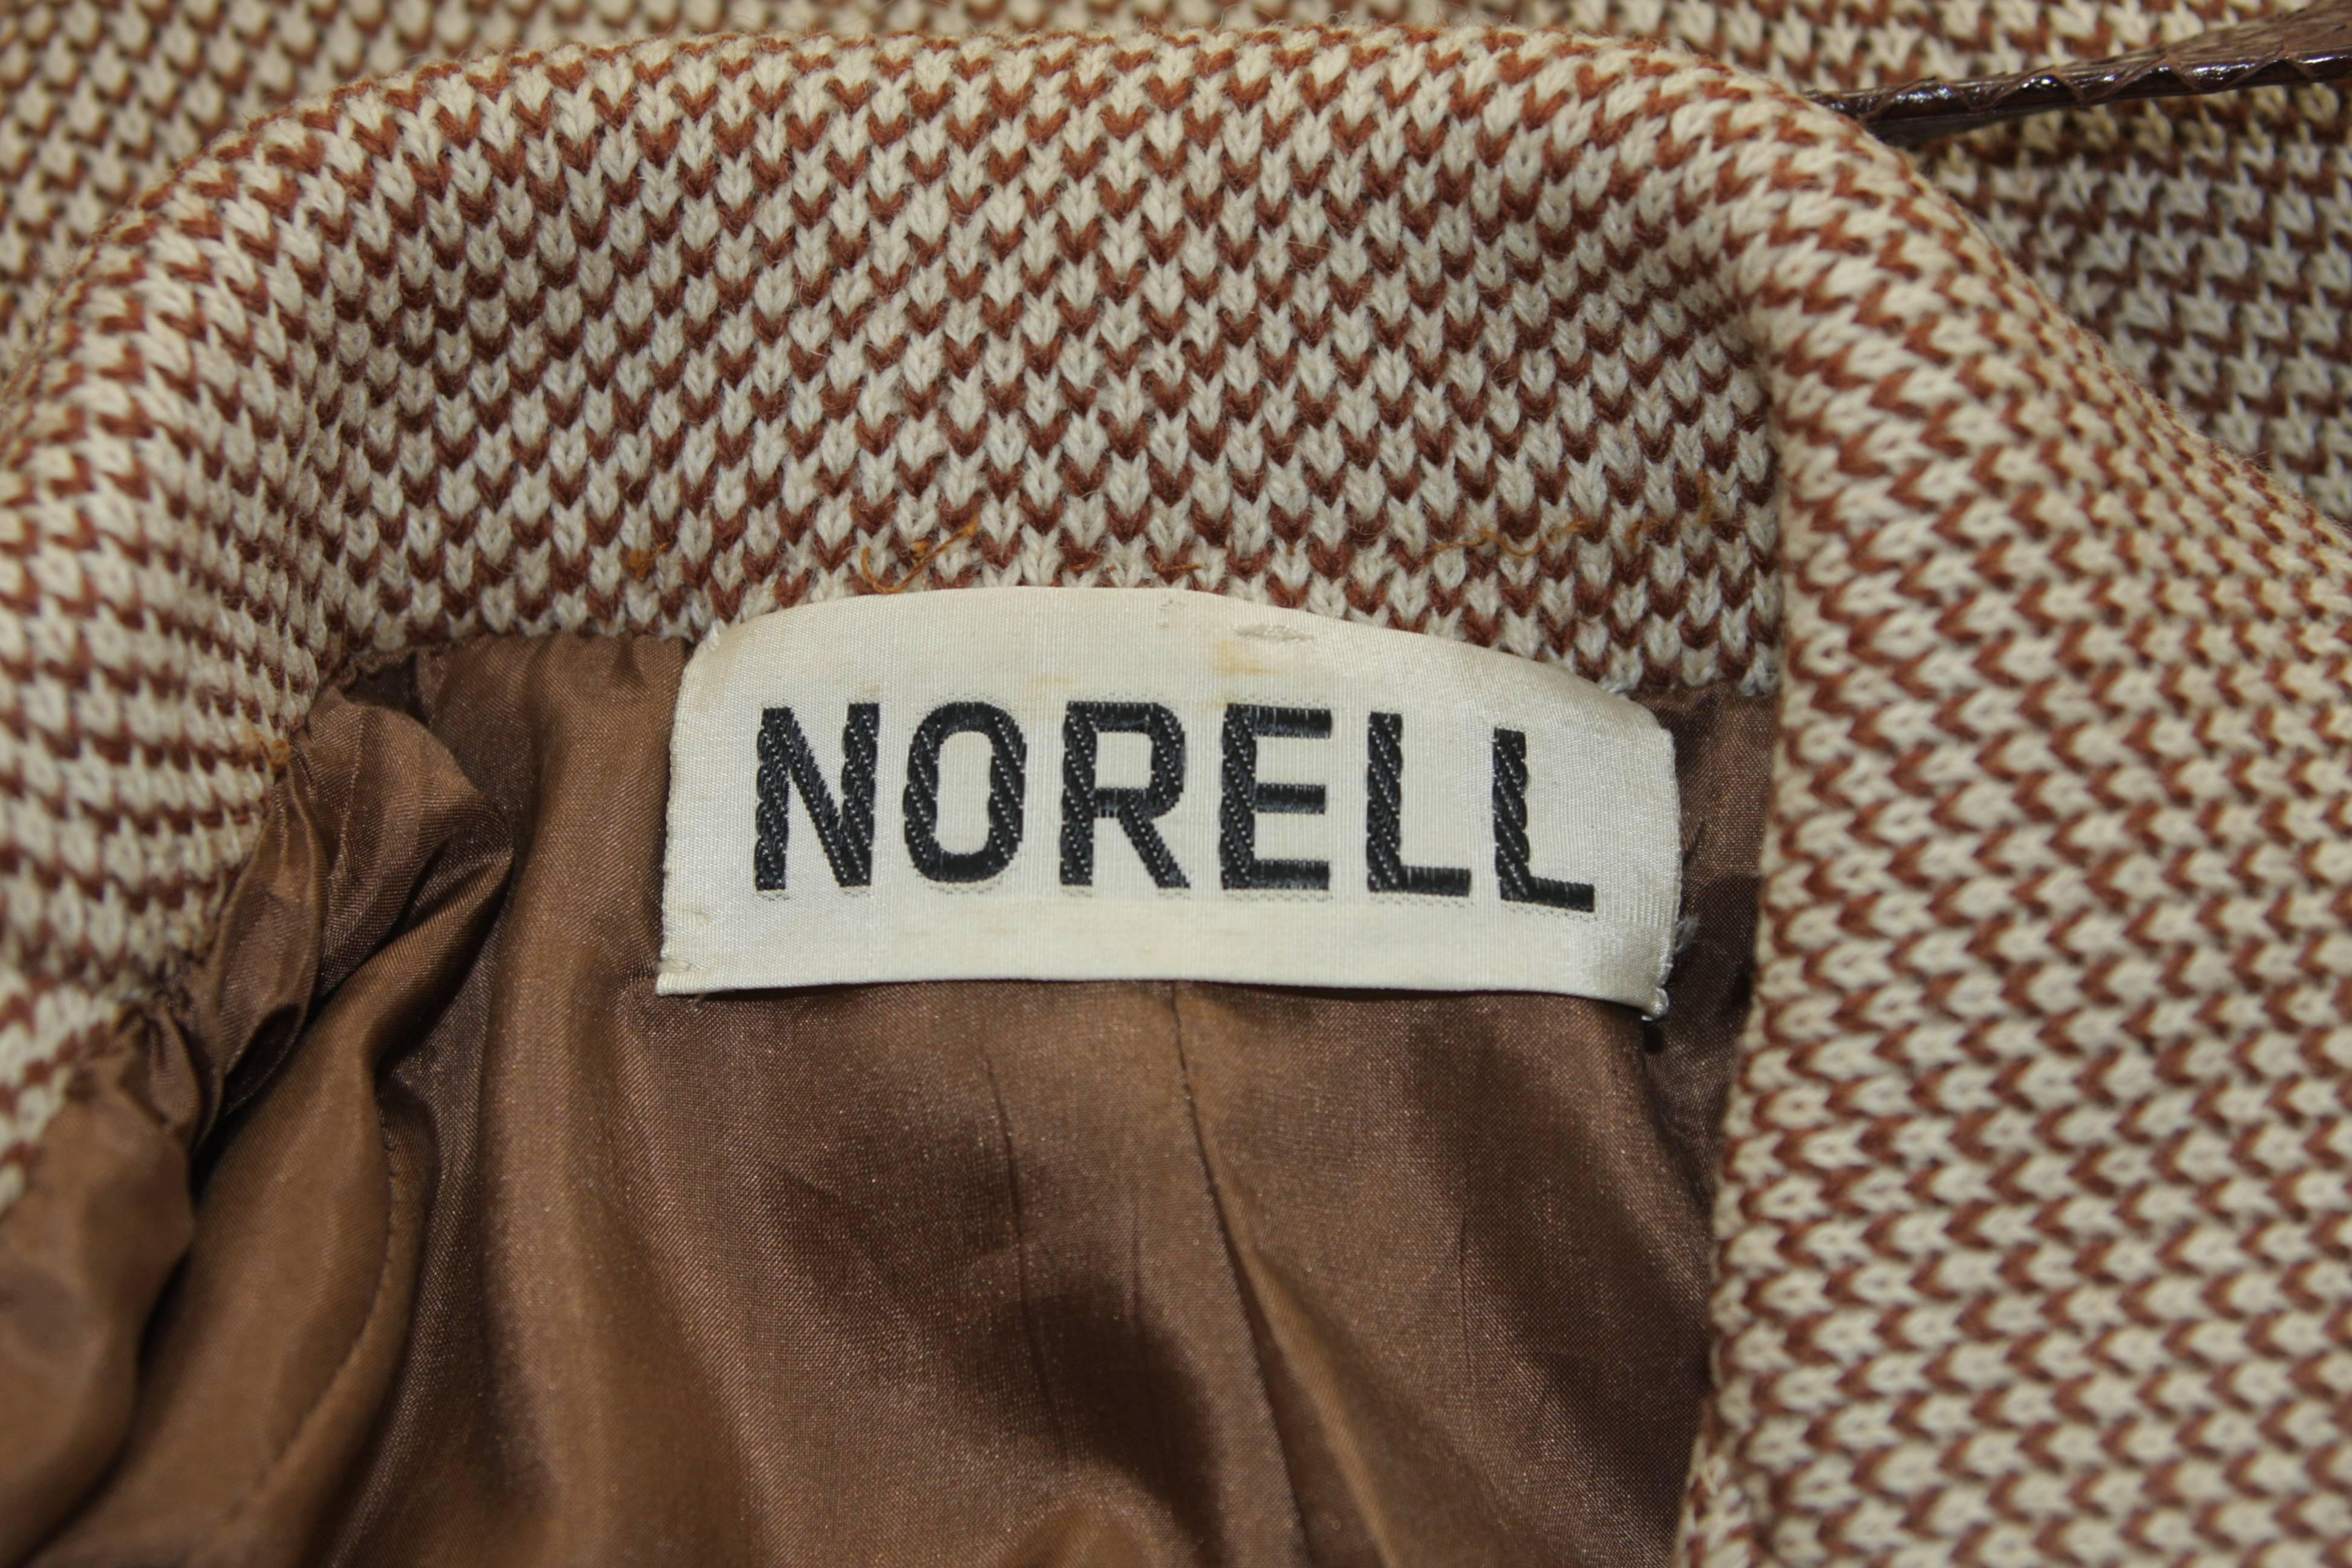 Norell Brown Wool Coat with Brown Snakeskin Belt Size Small Medium 4